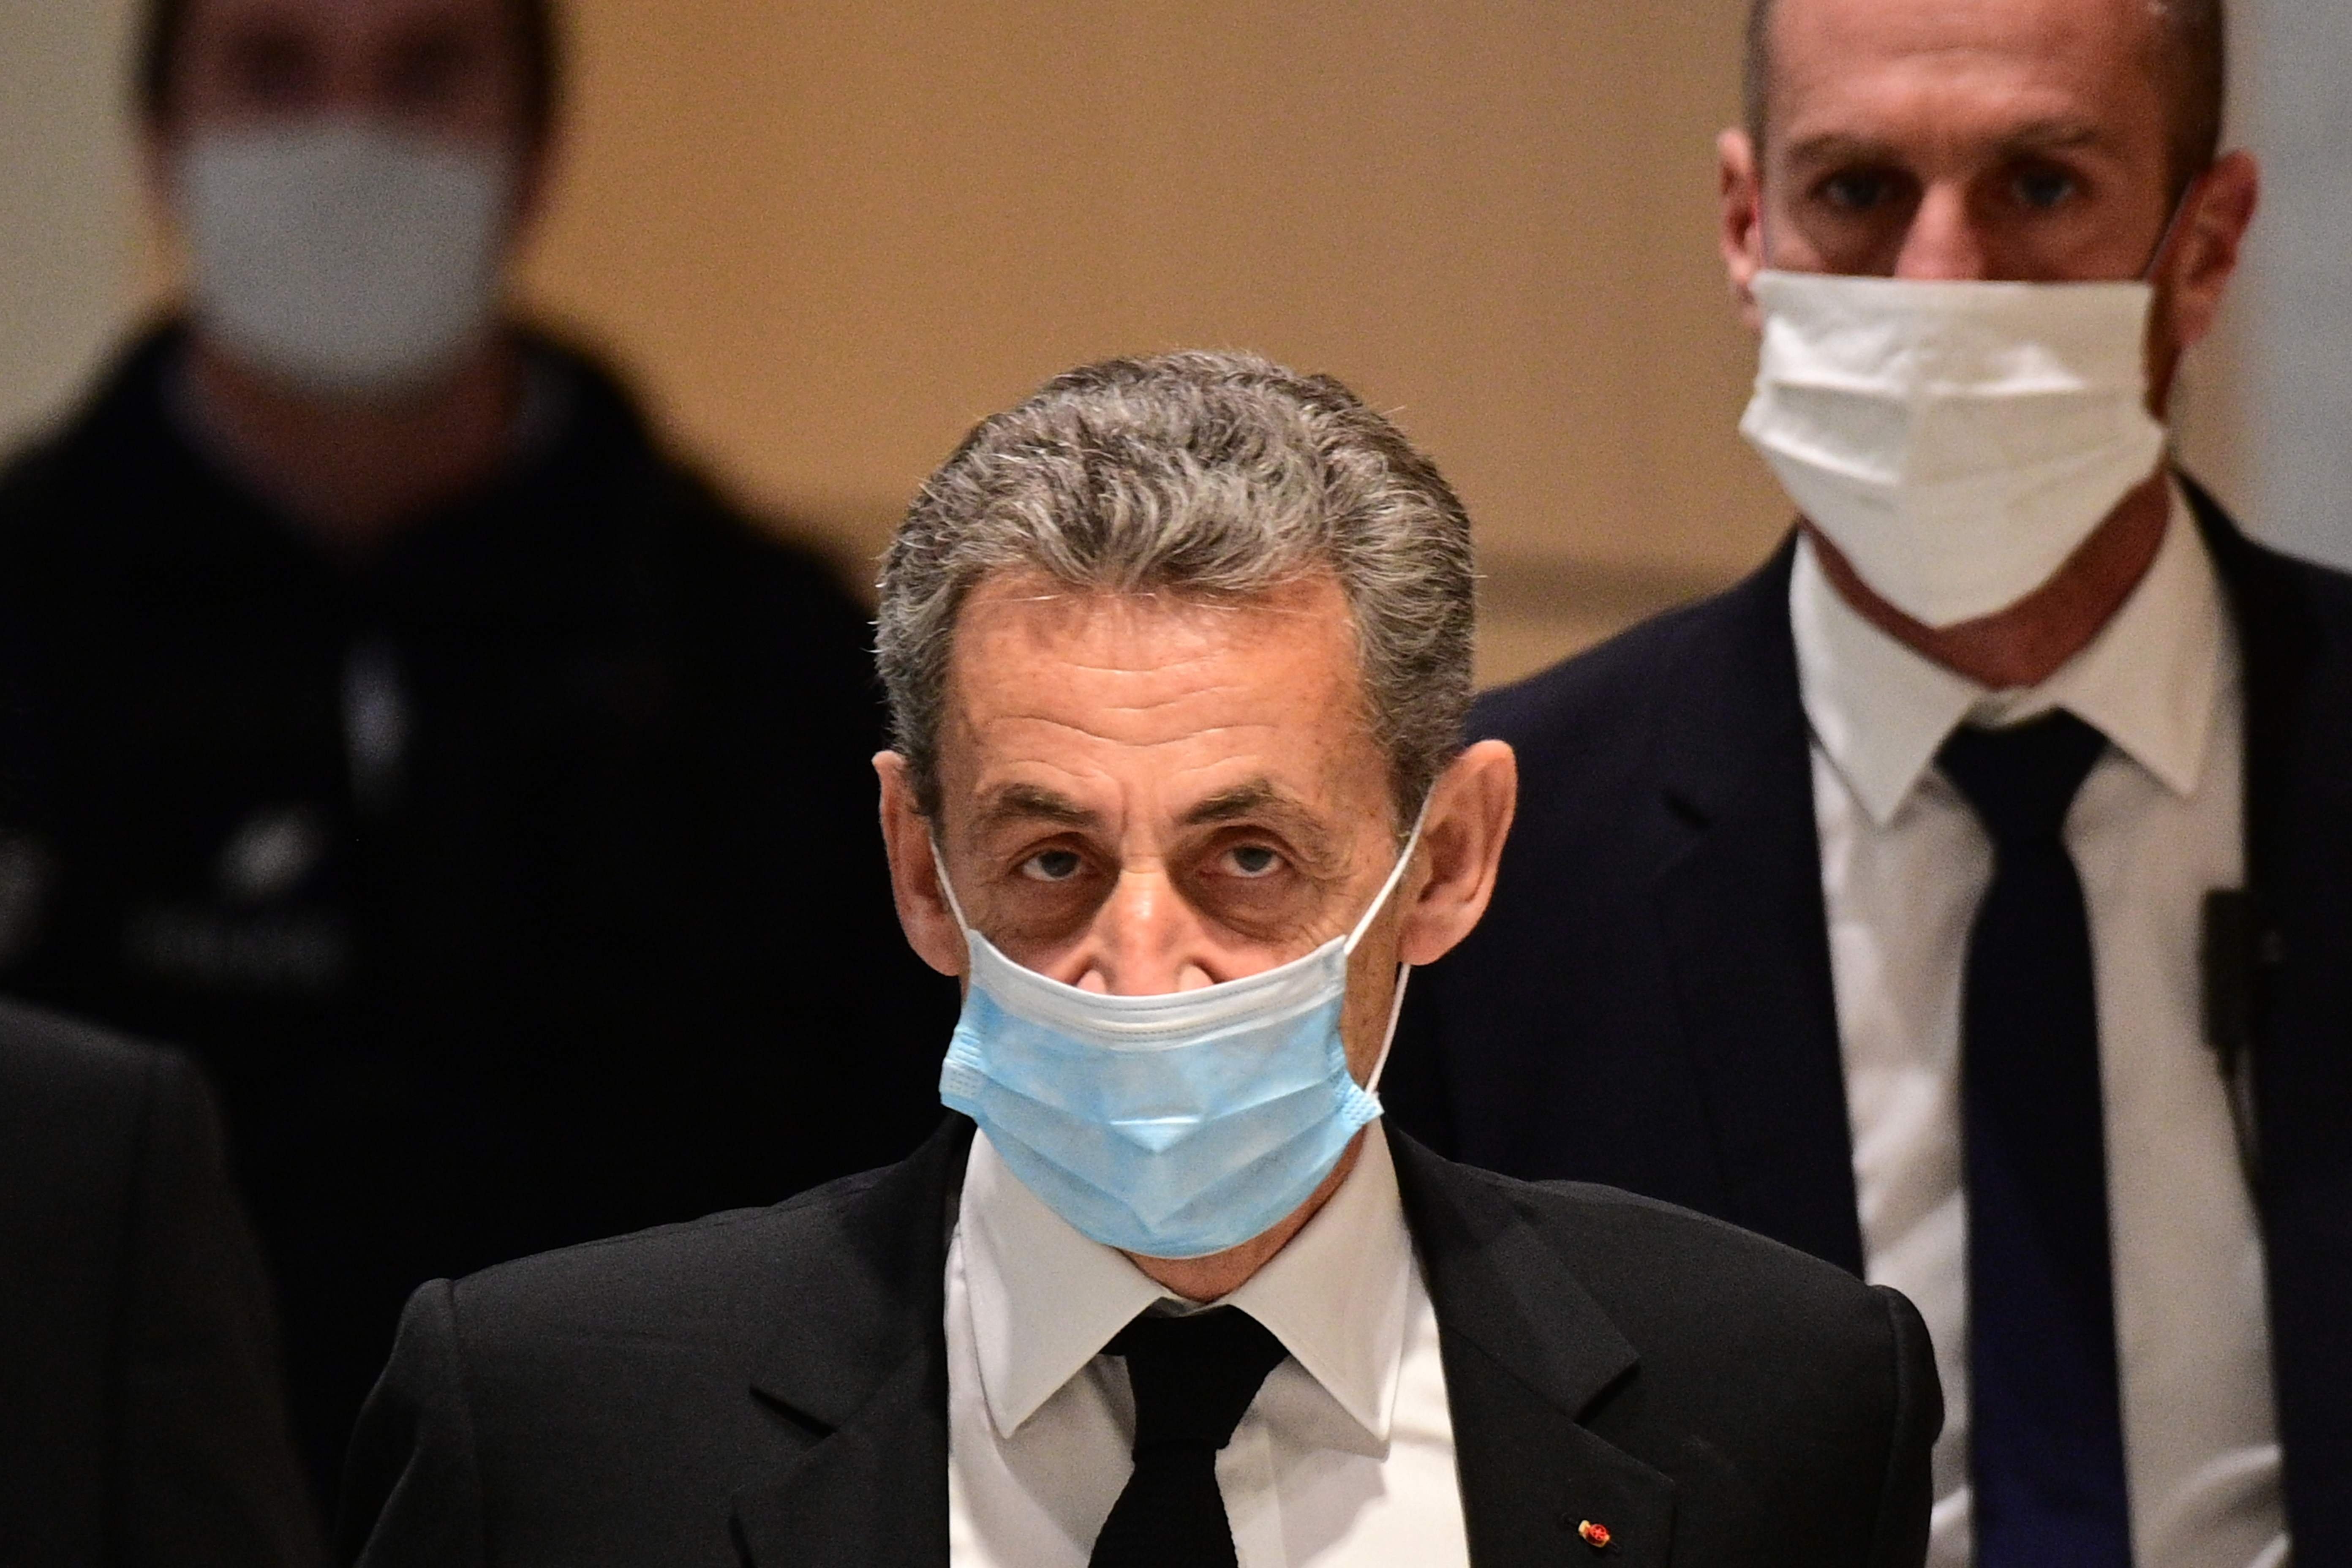 Former French president Nicolas Sarkozy (C) arrives for a hearing of his trial on corruption charges at Paris' courthouse, Paris, Dec. 7, 2020.

The French Financial Prosecution Office (PNF) has opened a preliminary investigation for "influence peddling" targeting Nicolas Sarkozy's consulting activities in Russia, corroborating what sources said on Jan. 15, 2021, confirming information from online newspaper Mediapart. (Photo by MARTIN BUREAU / AFP)